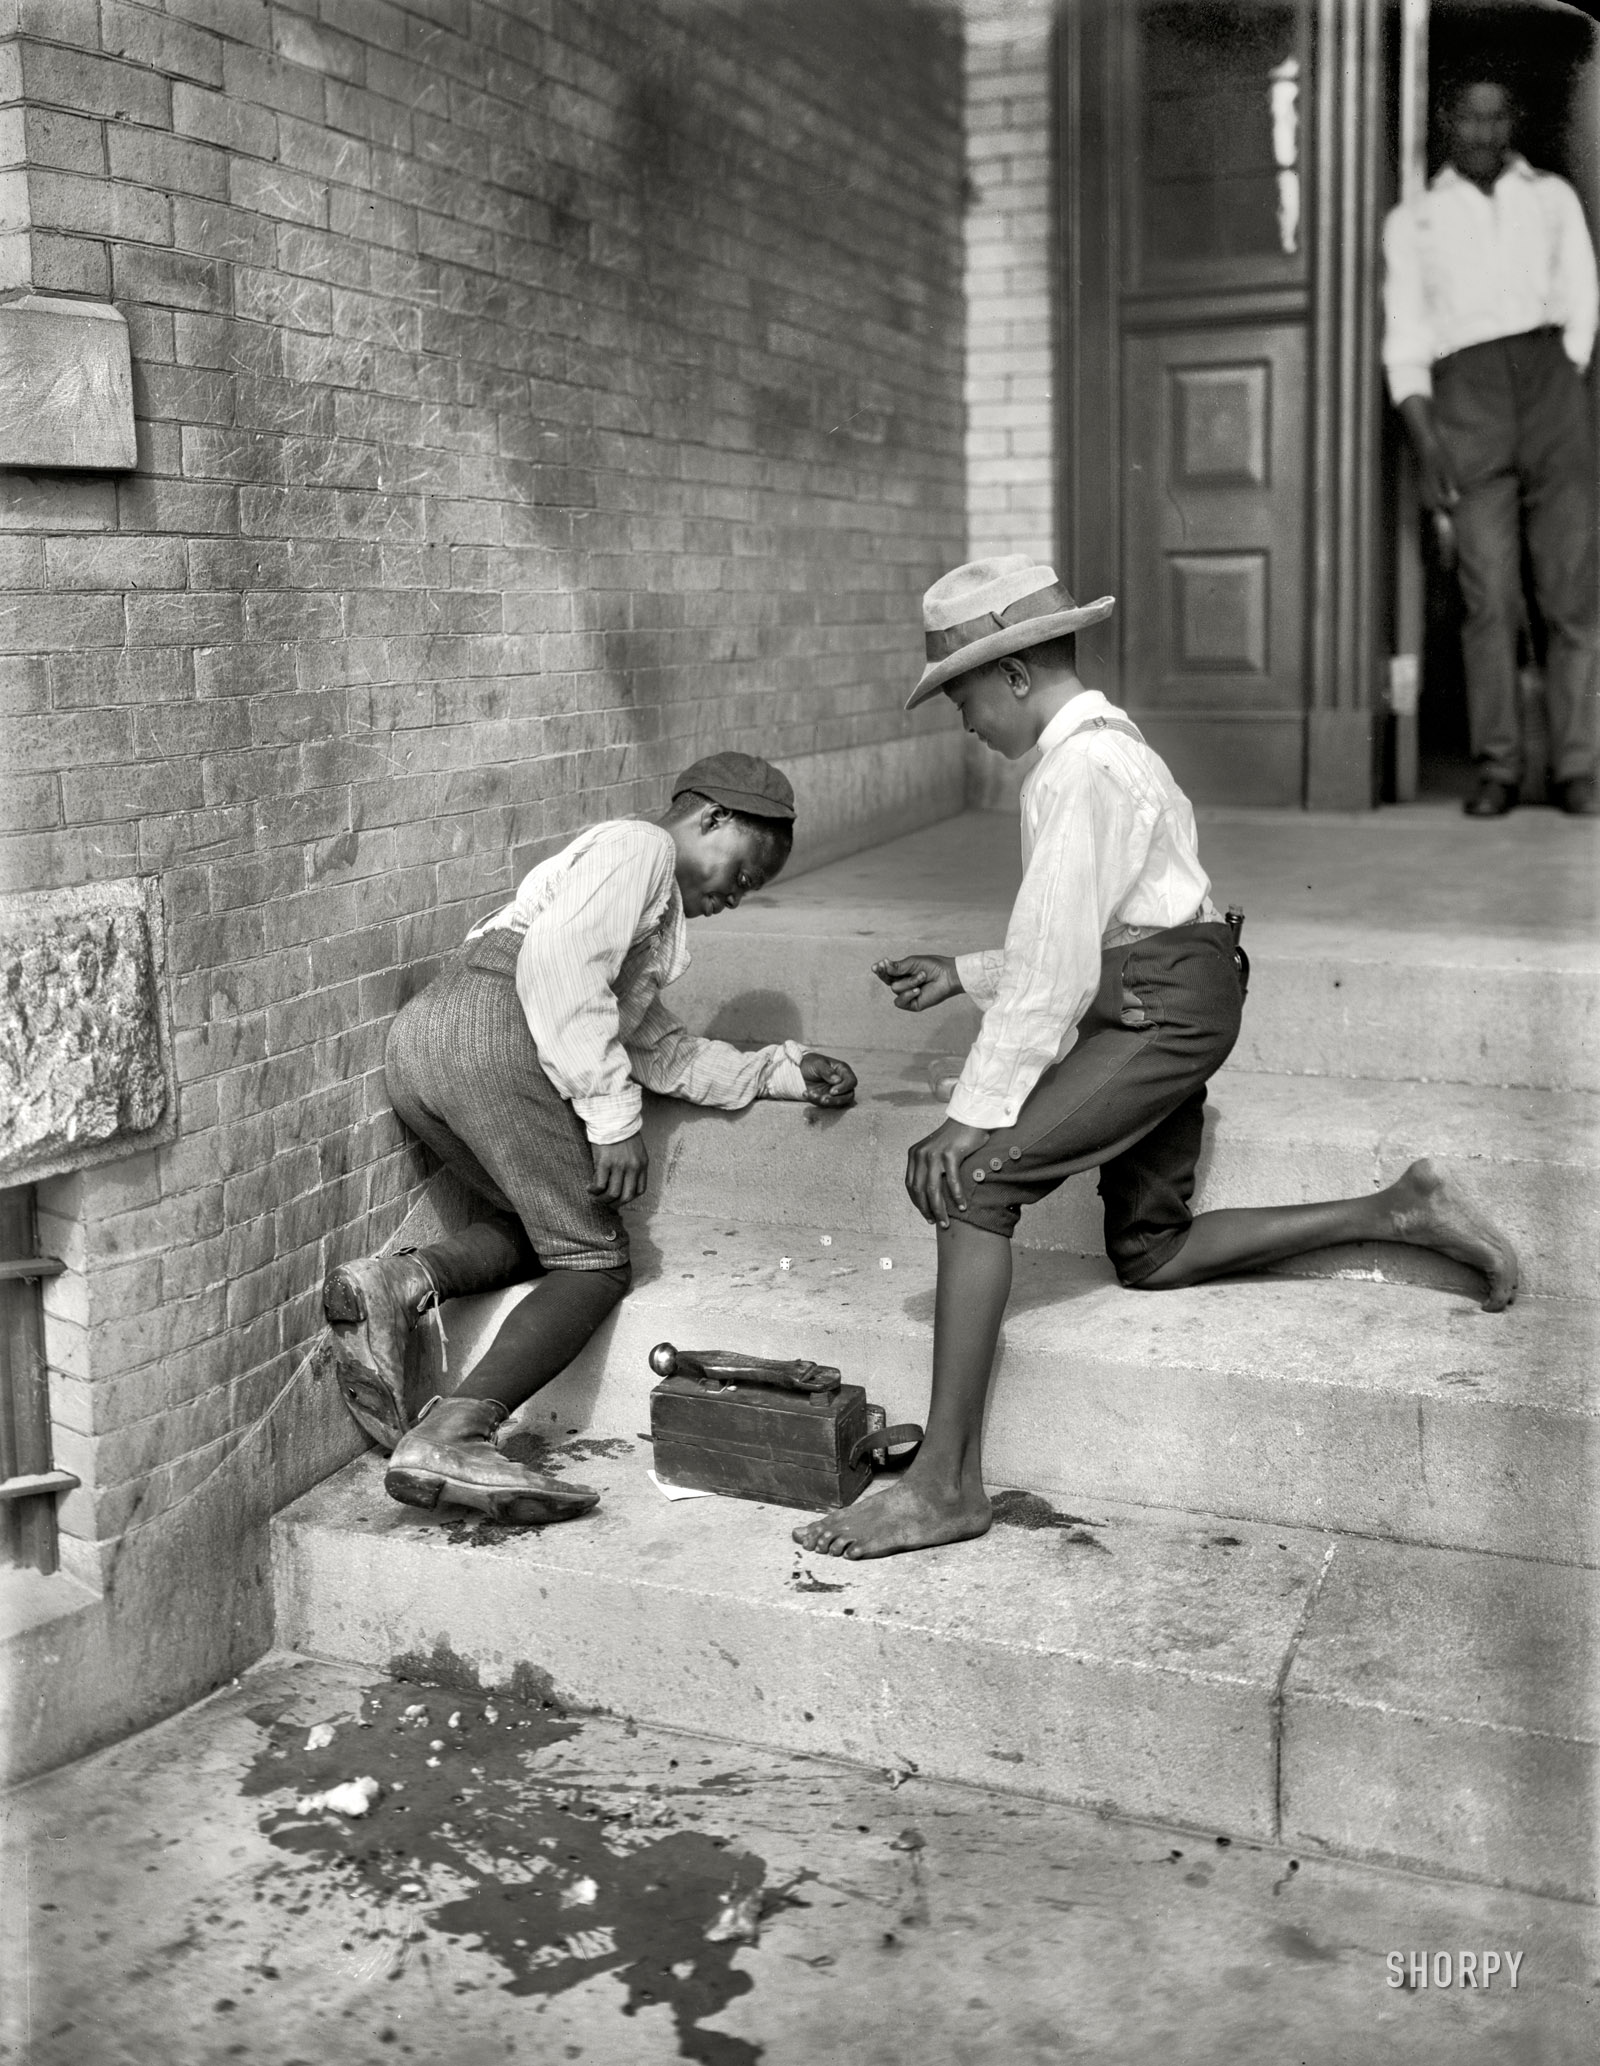 Anytown, U.S.A., circa 1901. "A quiet game." 8x10 inch dry plate glass negative, Detroit Publishing Company. View full size.